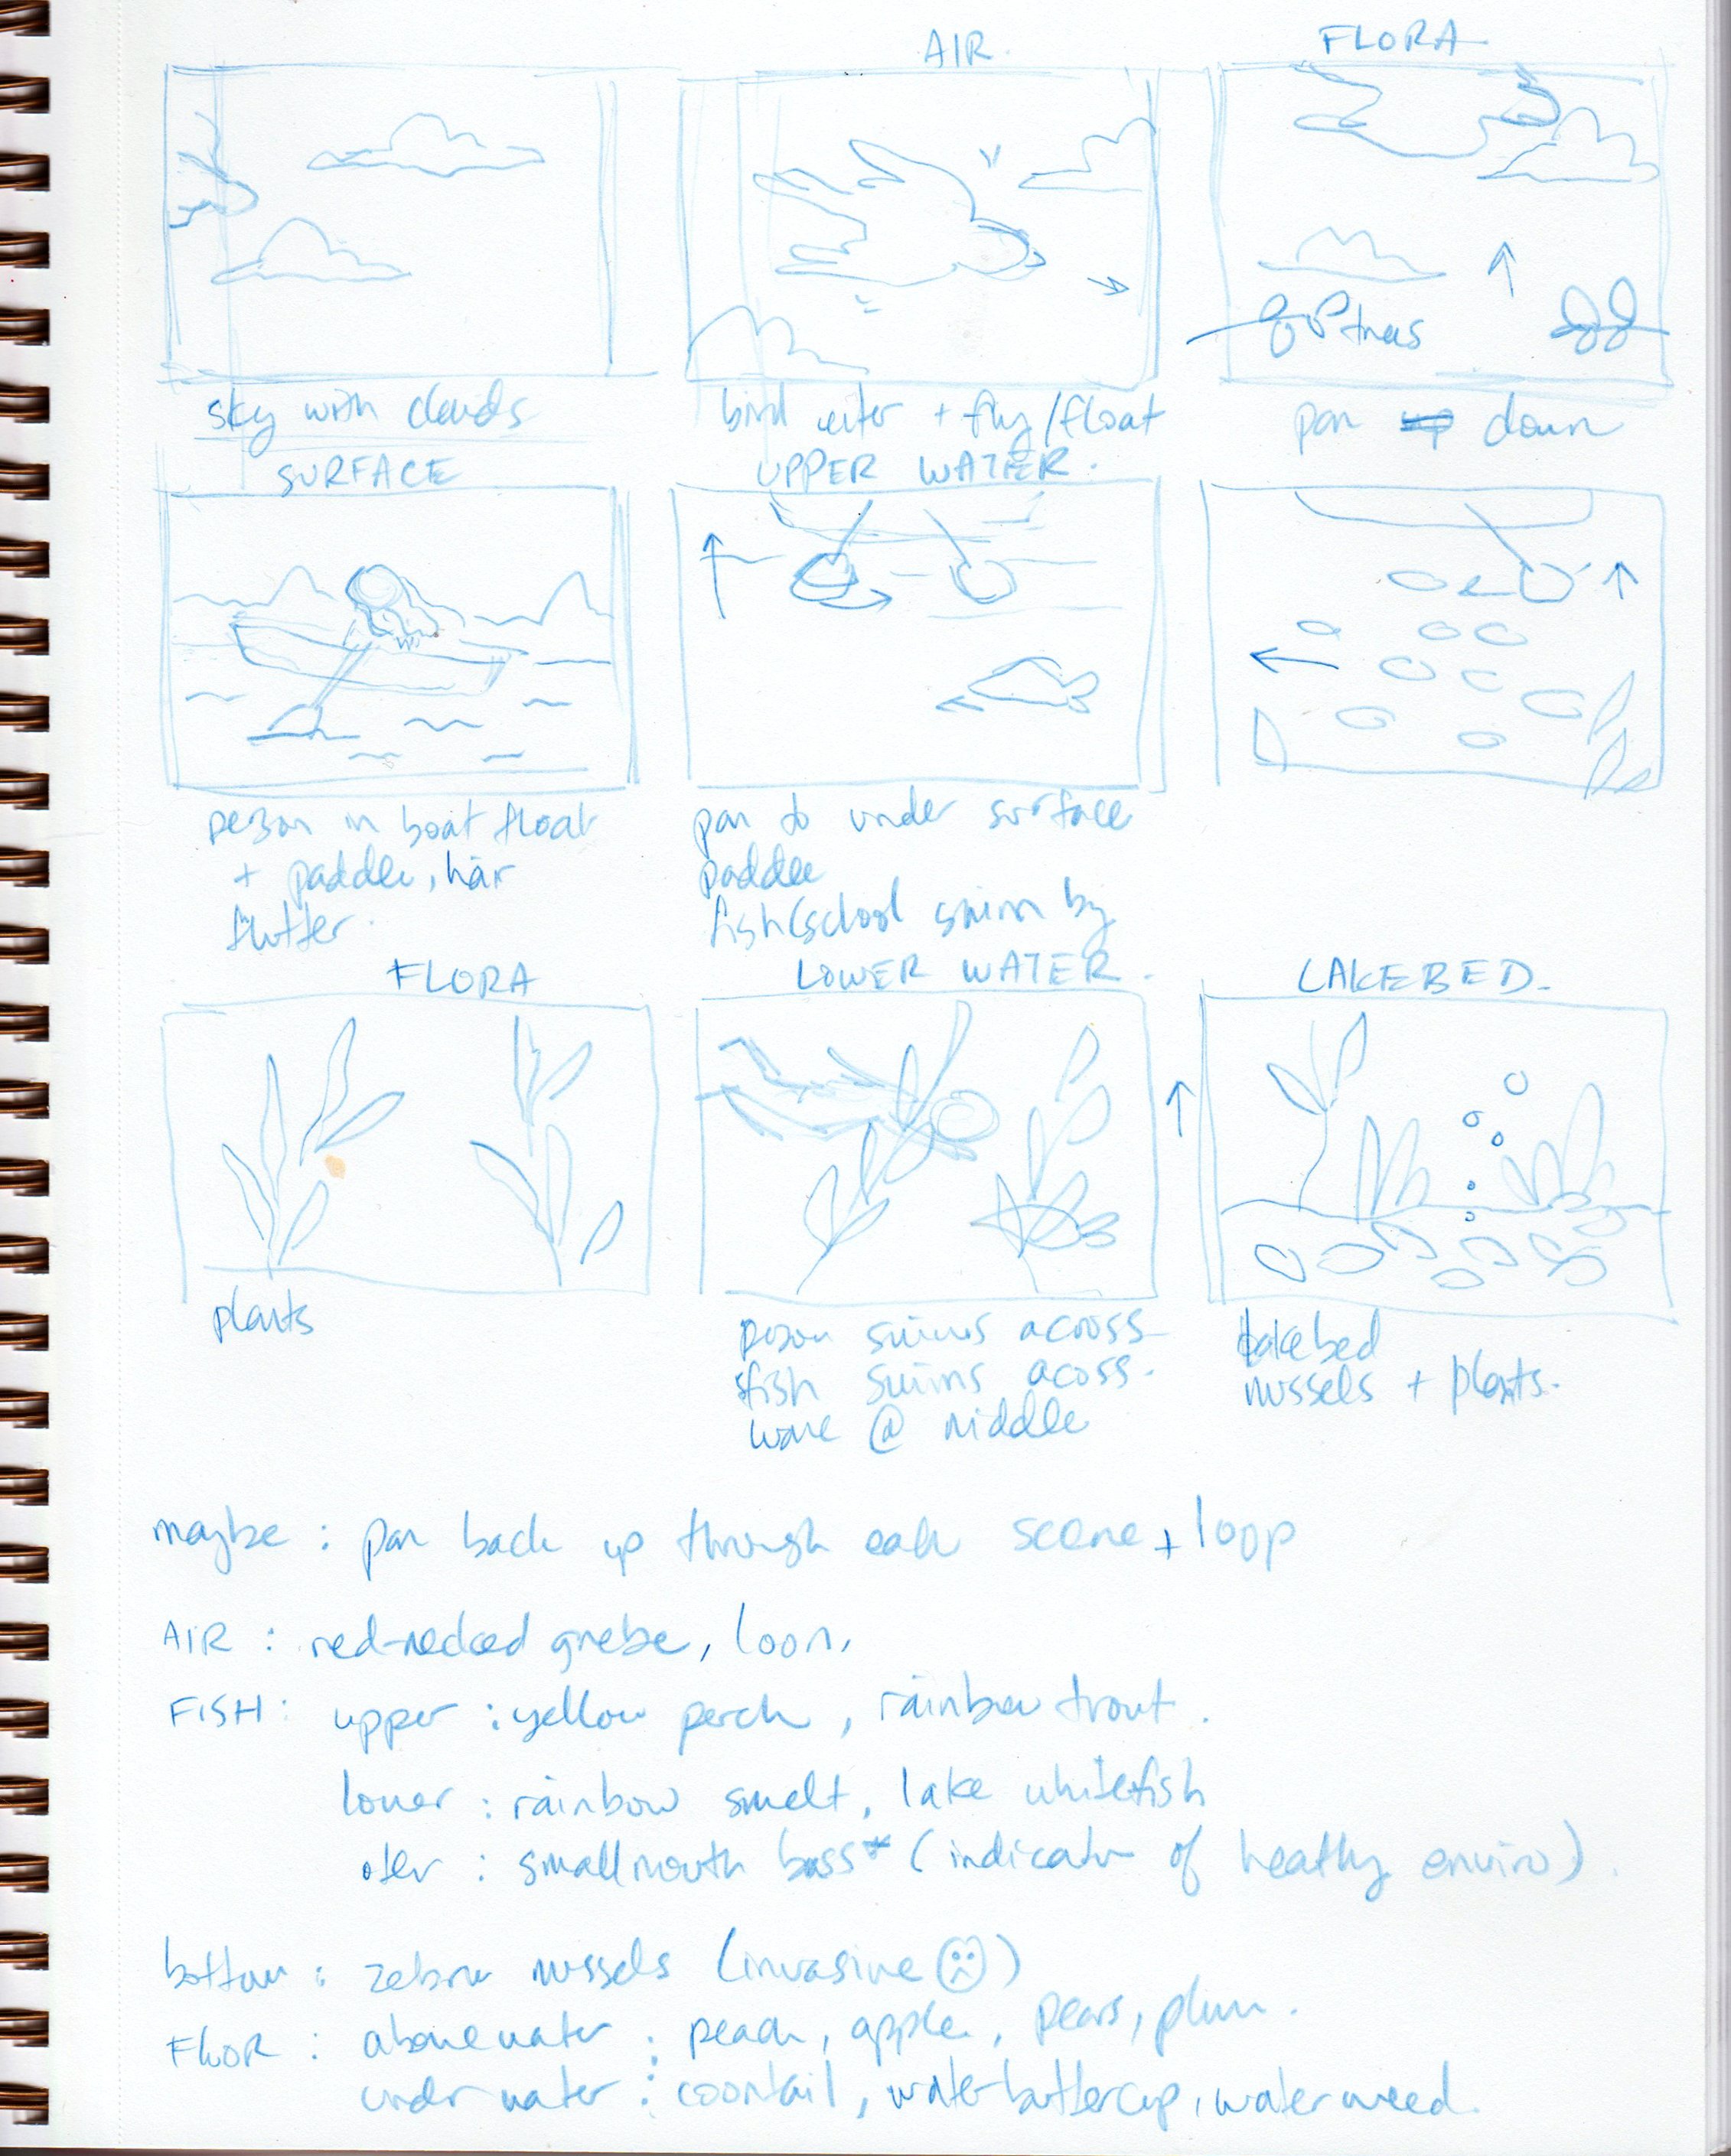 YenLinhThai_Under and over (the water)_storyboard and notes.jpg